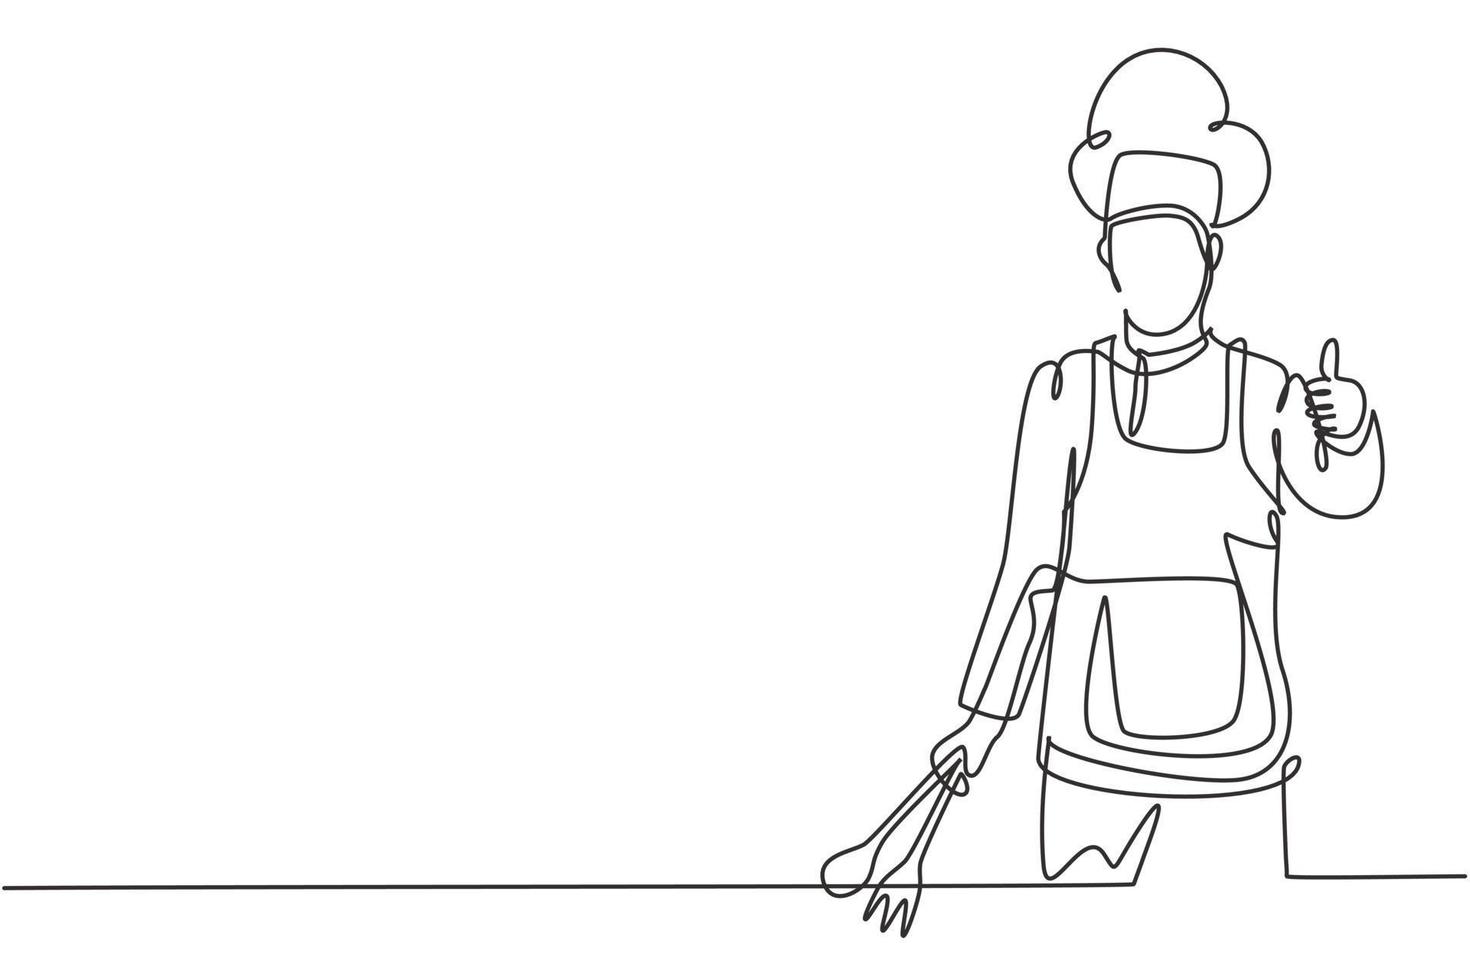 Single one line drawing of the chef with thumbs-up gestures and uniforms is ready to cook meals for guests at famous restaurants. Modern continuous line draw design graphic vector illustration.